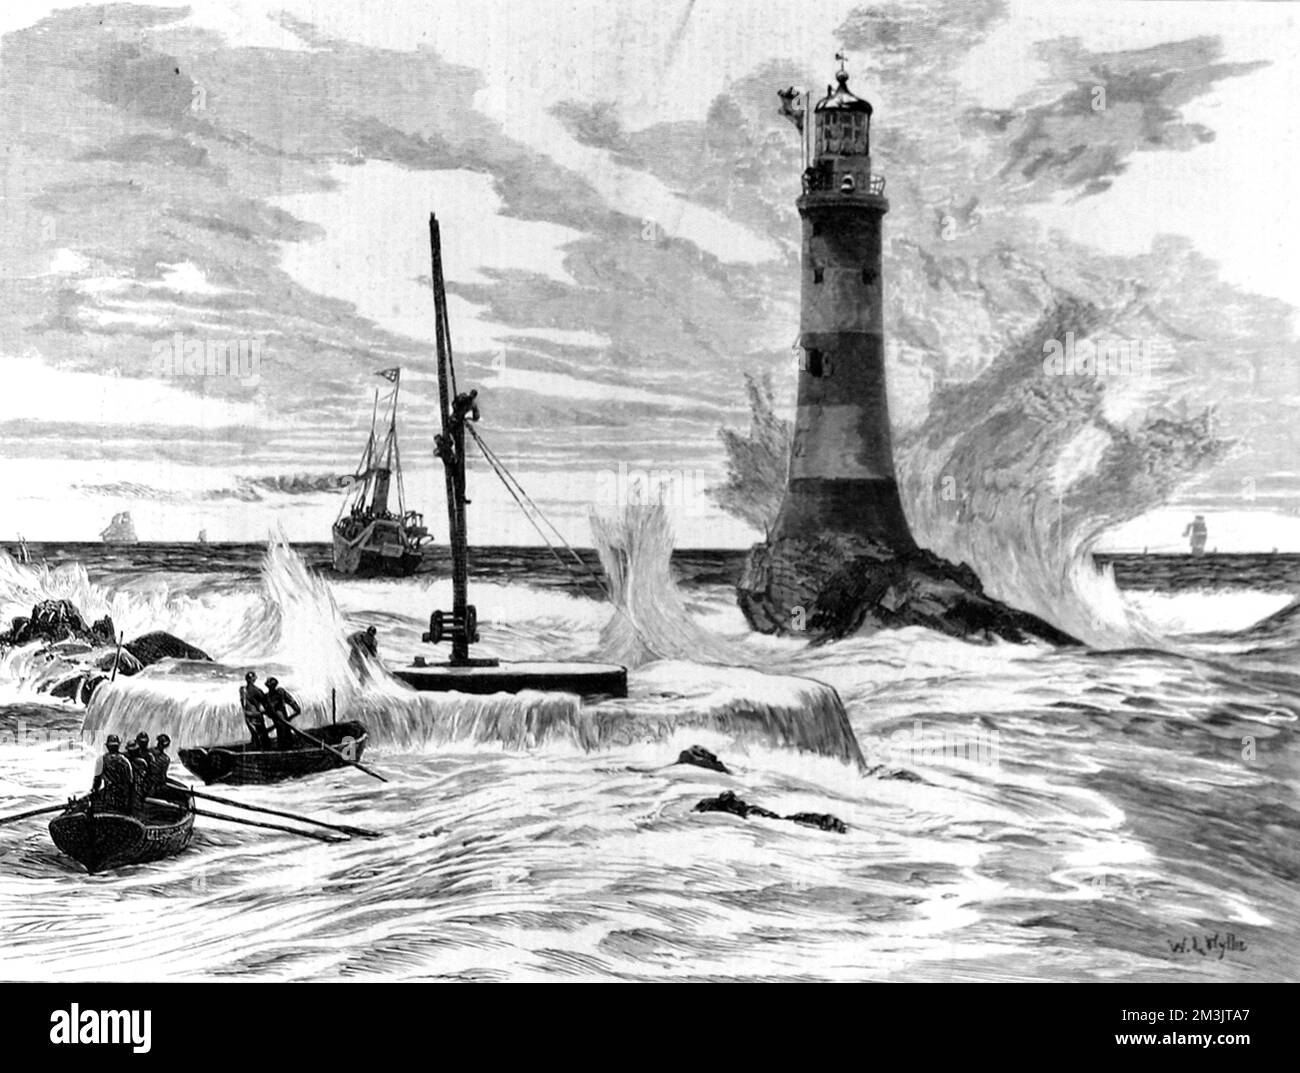 Engraving of the Eddystone lighthouse built by Smeaton in 1759 and the foundations of the new lighthouse, designed by Sir James Douglass. The Smeaton lighthouse was being replaced as its foundations had been eroded. Once the new Douglass lighthouse was complete, the Smeaton lighthouse was taken down and rebuilt on the Plymouth Hoe.  1879 Stock Photo